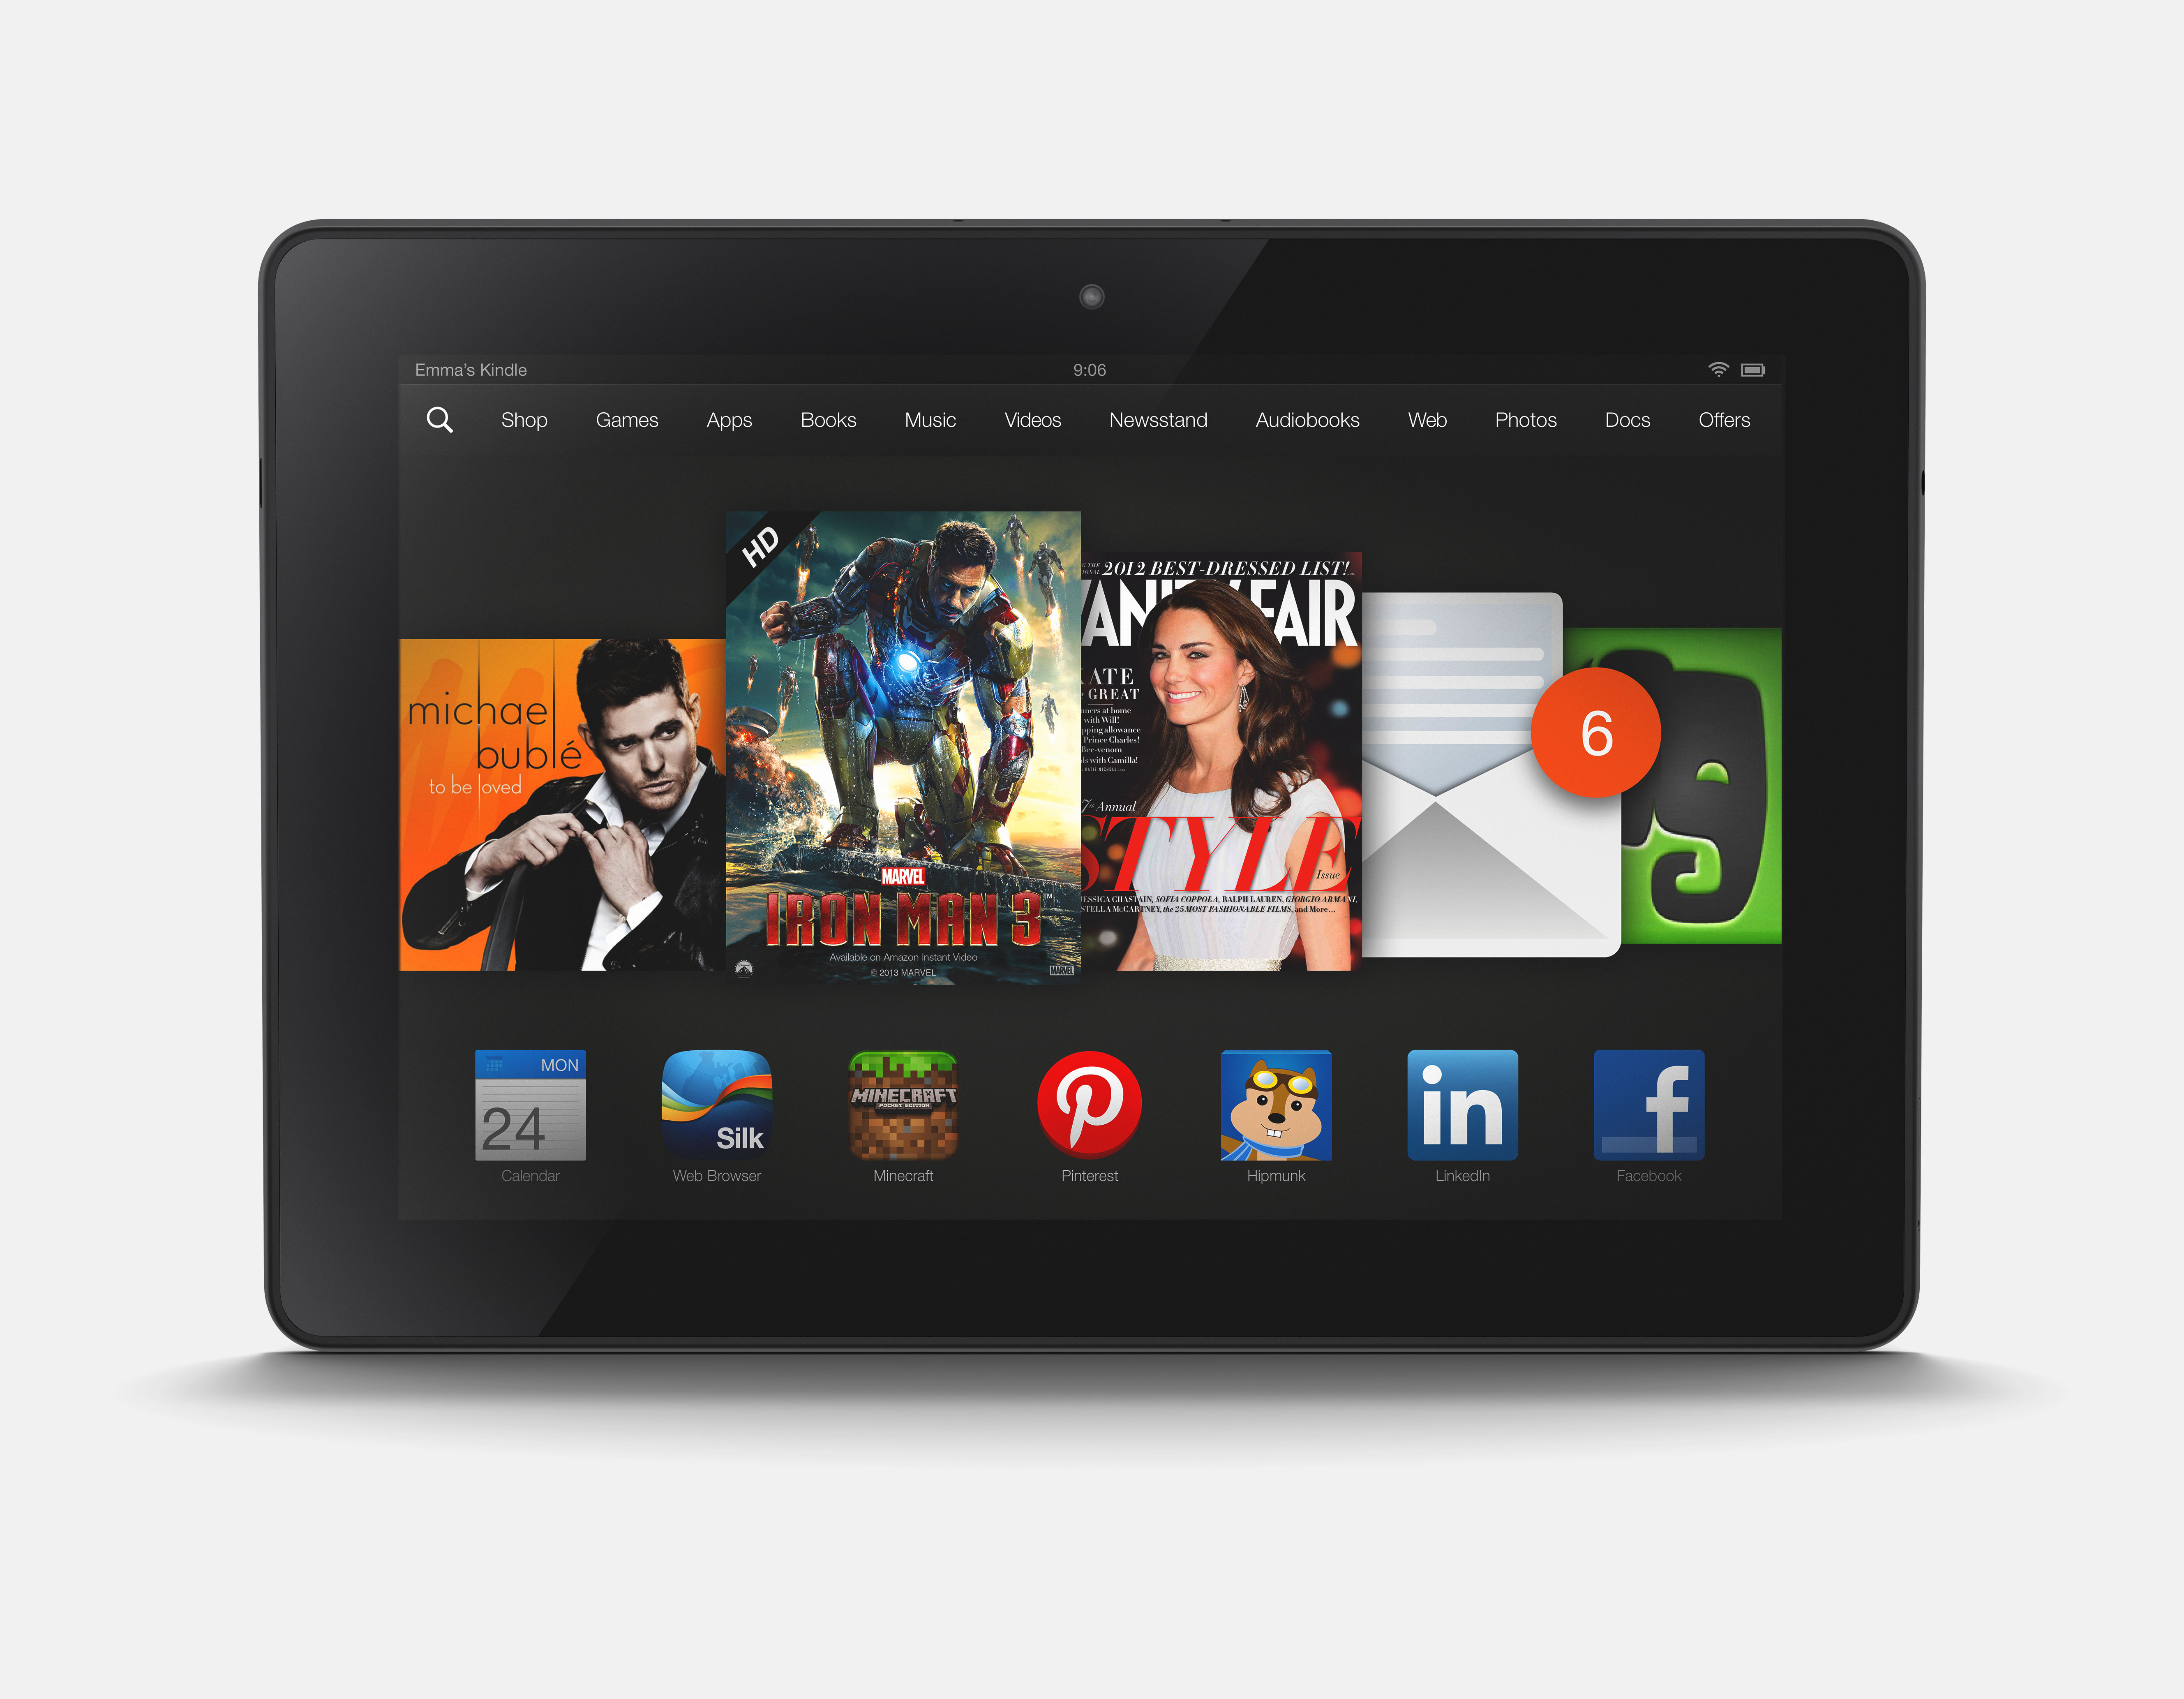 Kindle Fire HDX 8.9 Inch with Amazon's New Mayday Button